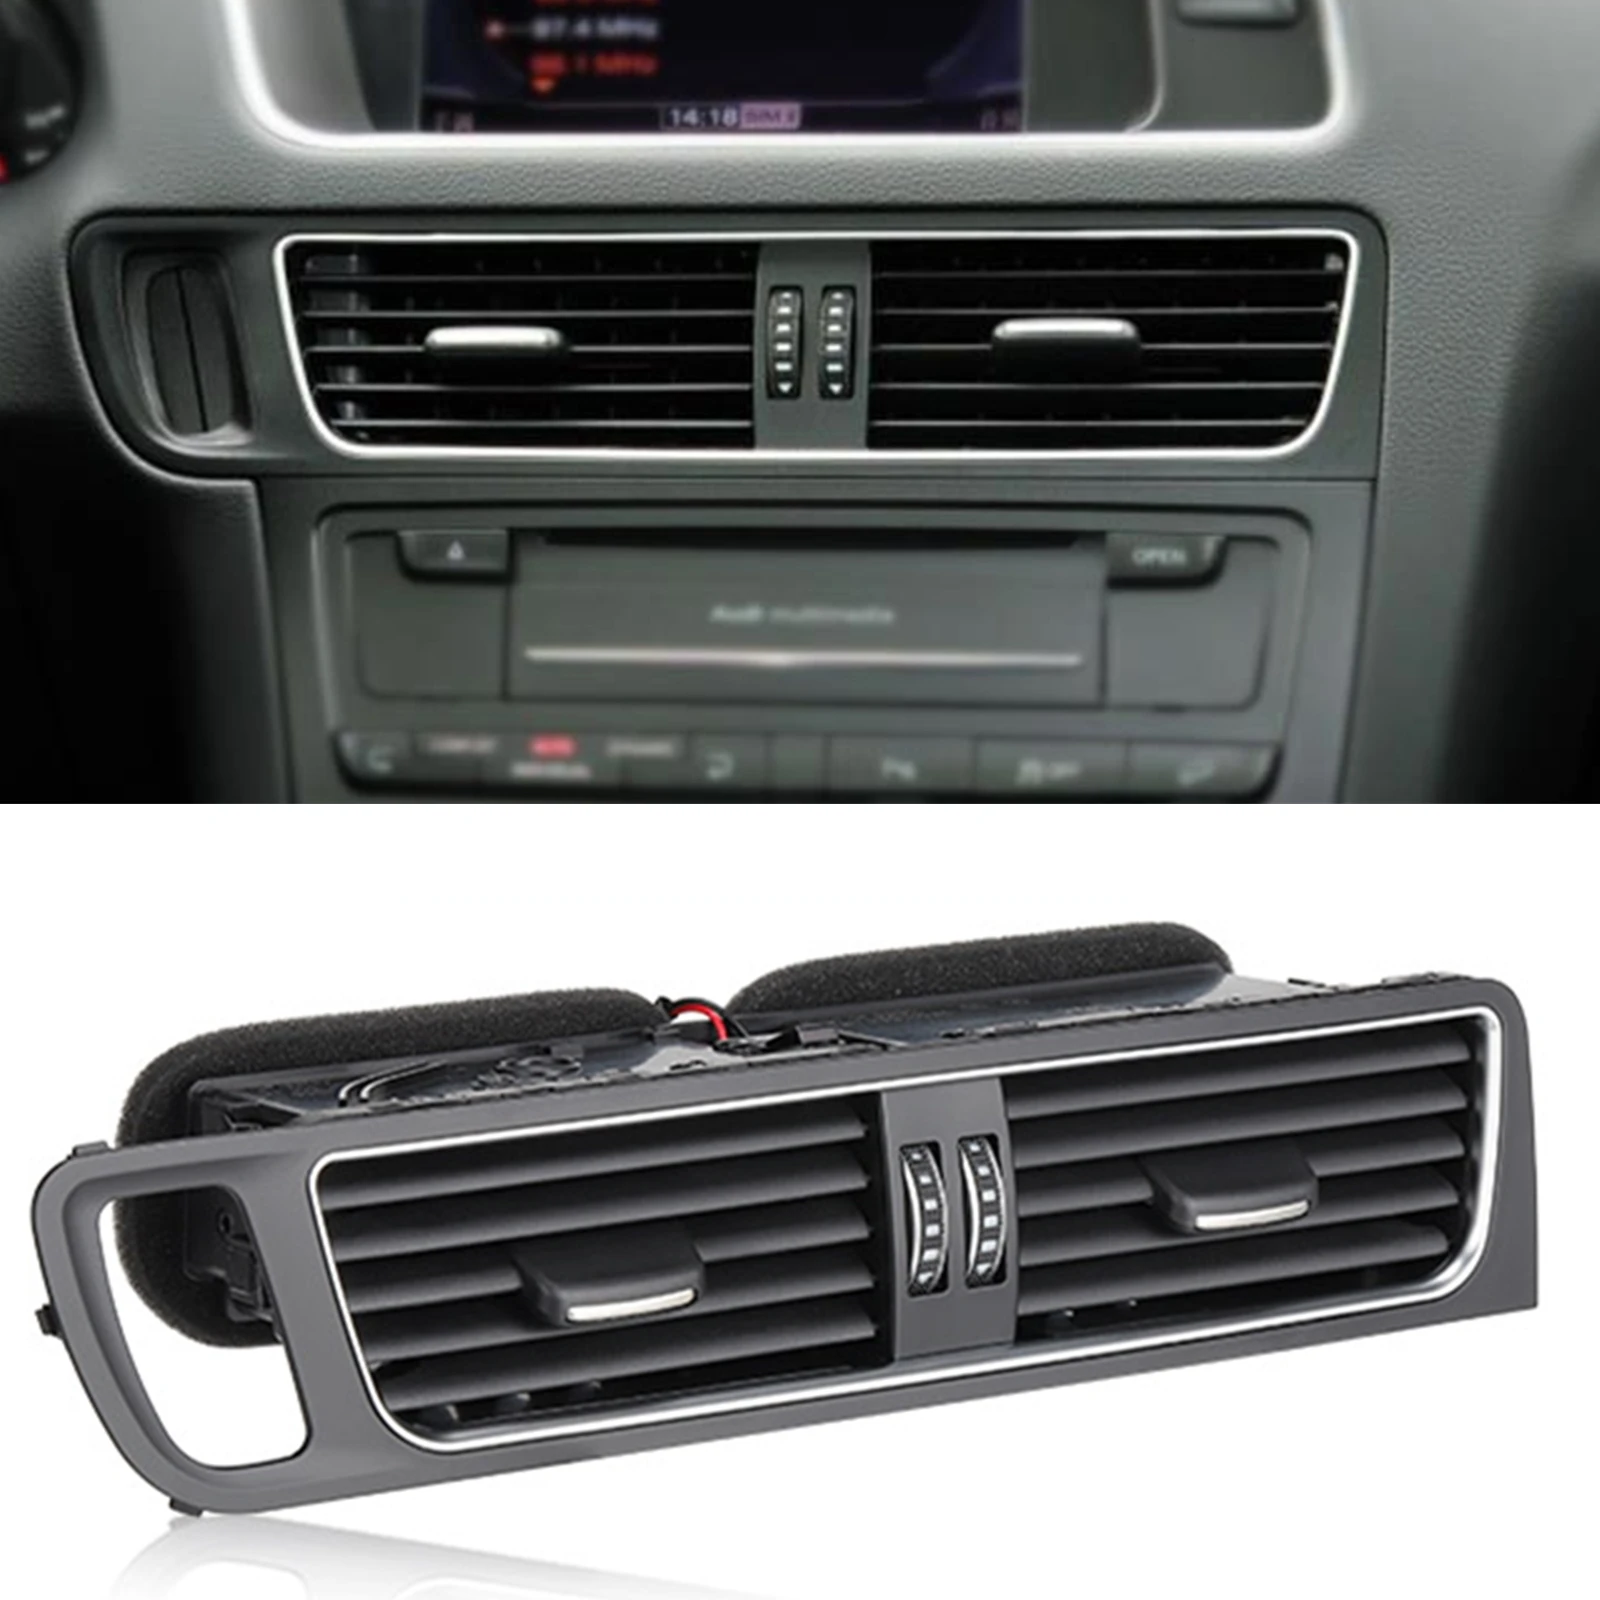 

Car Center Dashboard A/C Air Vent Assembly For Audi Q5 2009-2018 LHD 8R1820951G Dash Board Panel Conditioning Fresh Grille Assy